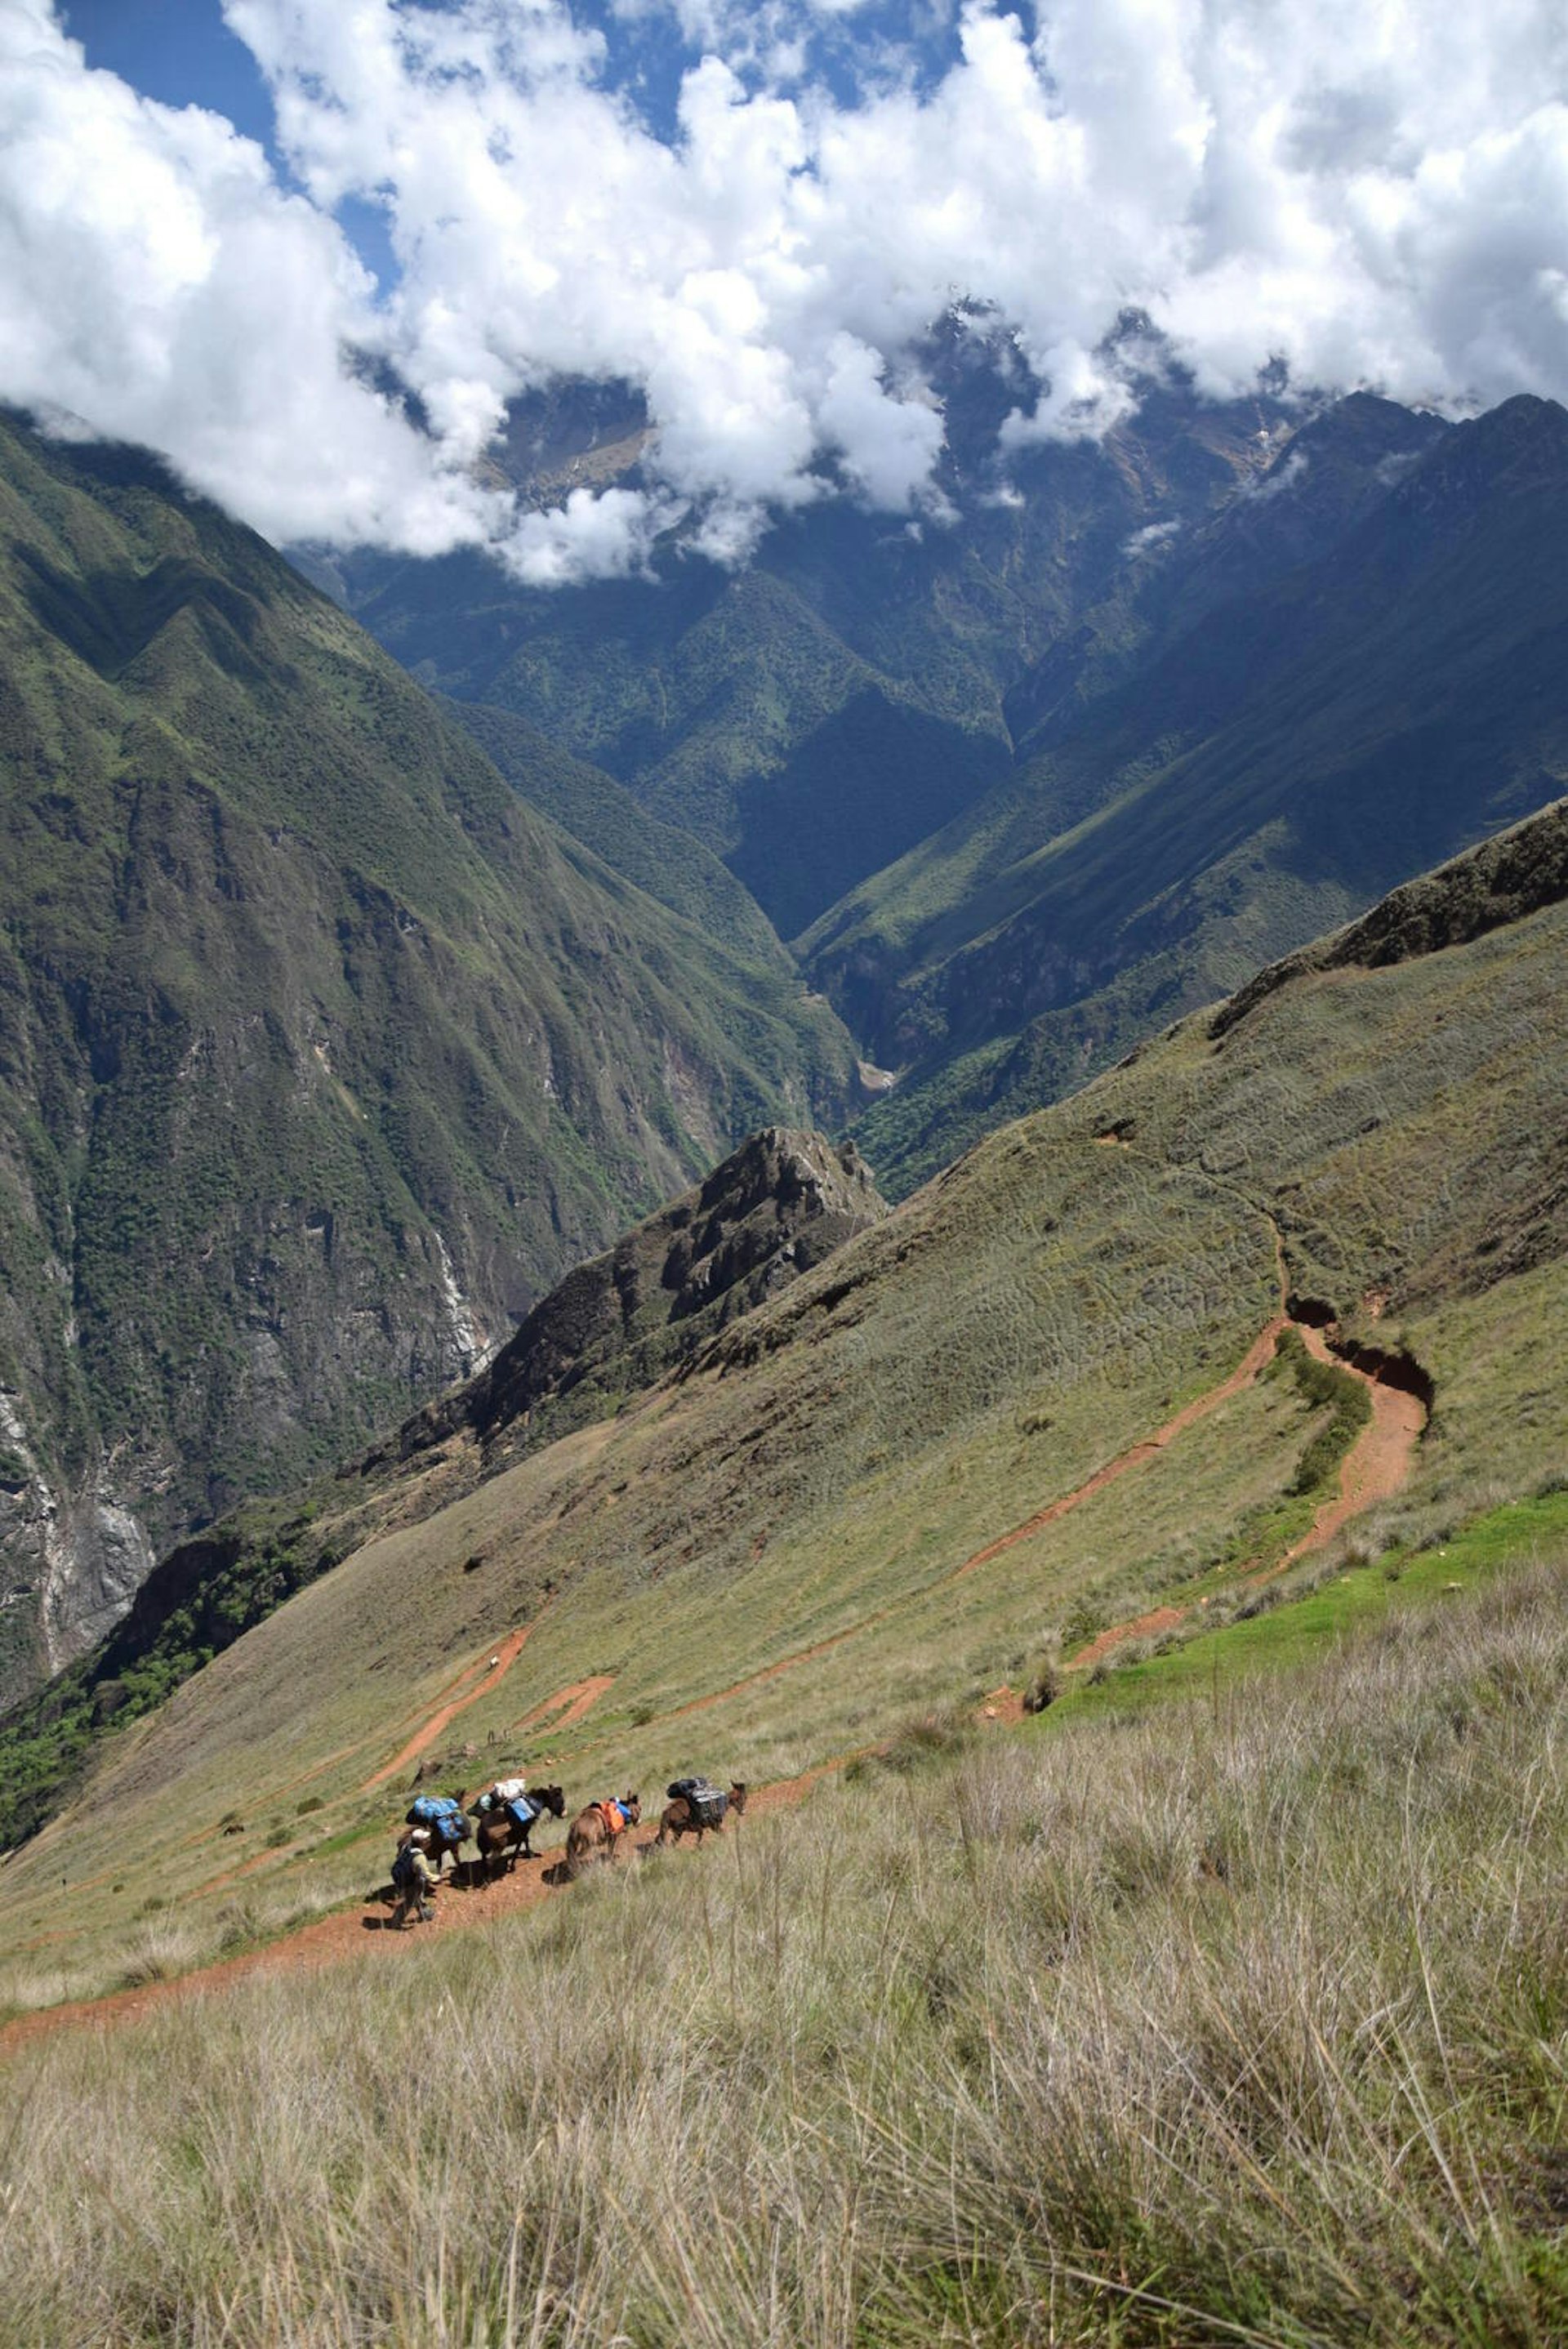 Until plans for cable car access are realized, seeing Choquequirao will require a three-day hike from Cachora © Mark Johanson / Lonely Planet